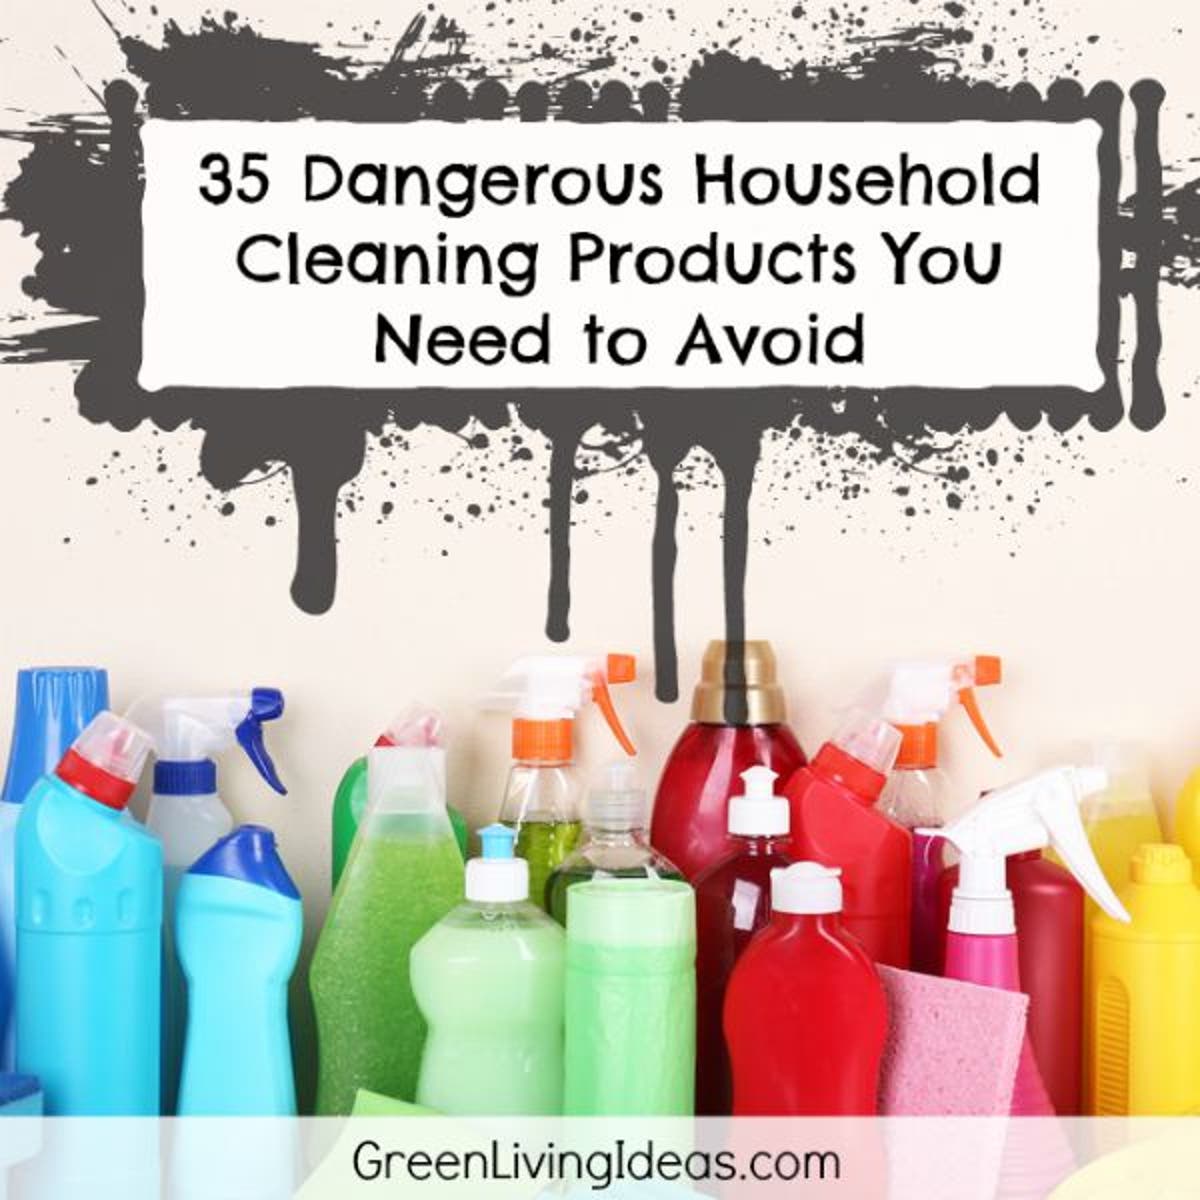 Are Household Cleaners Harmful? 